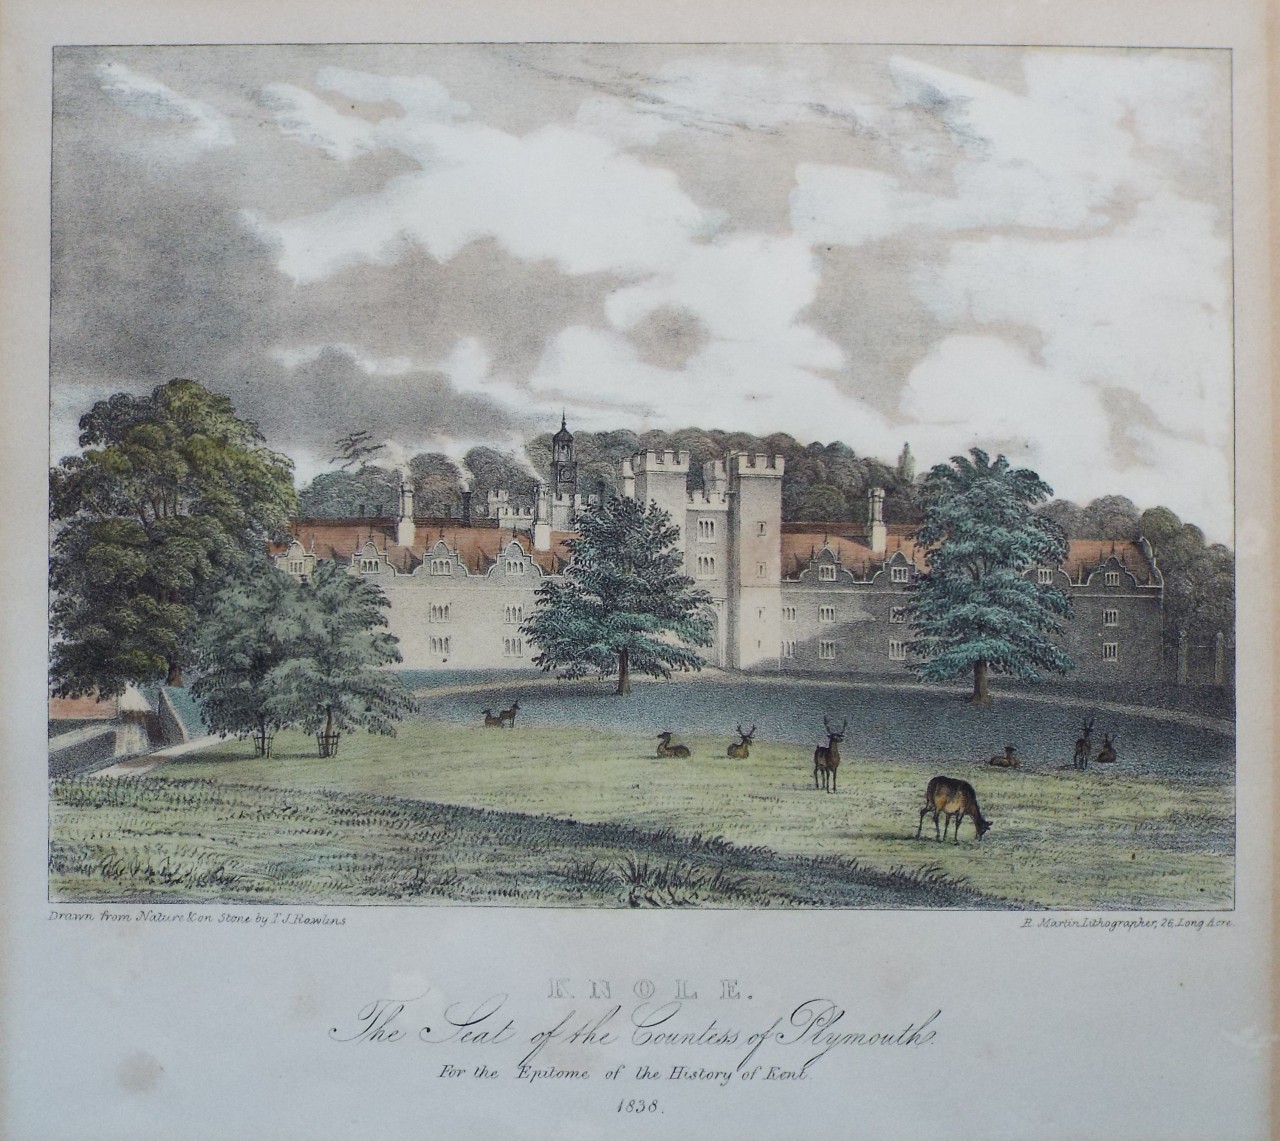 Lithograph - Knole. The Seat of the Countess of Plymouth - Rawlins